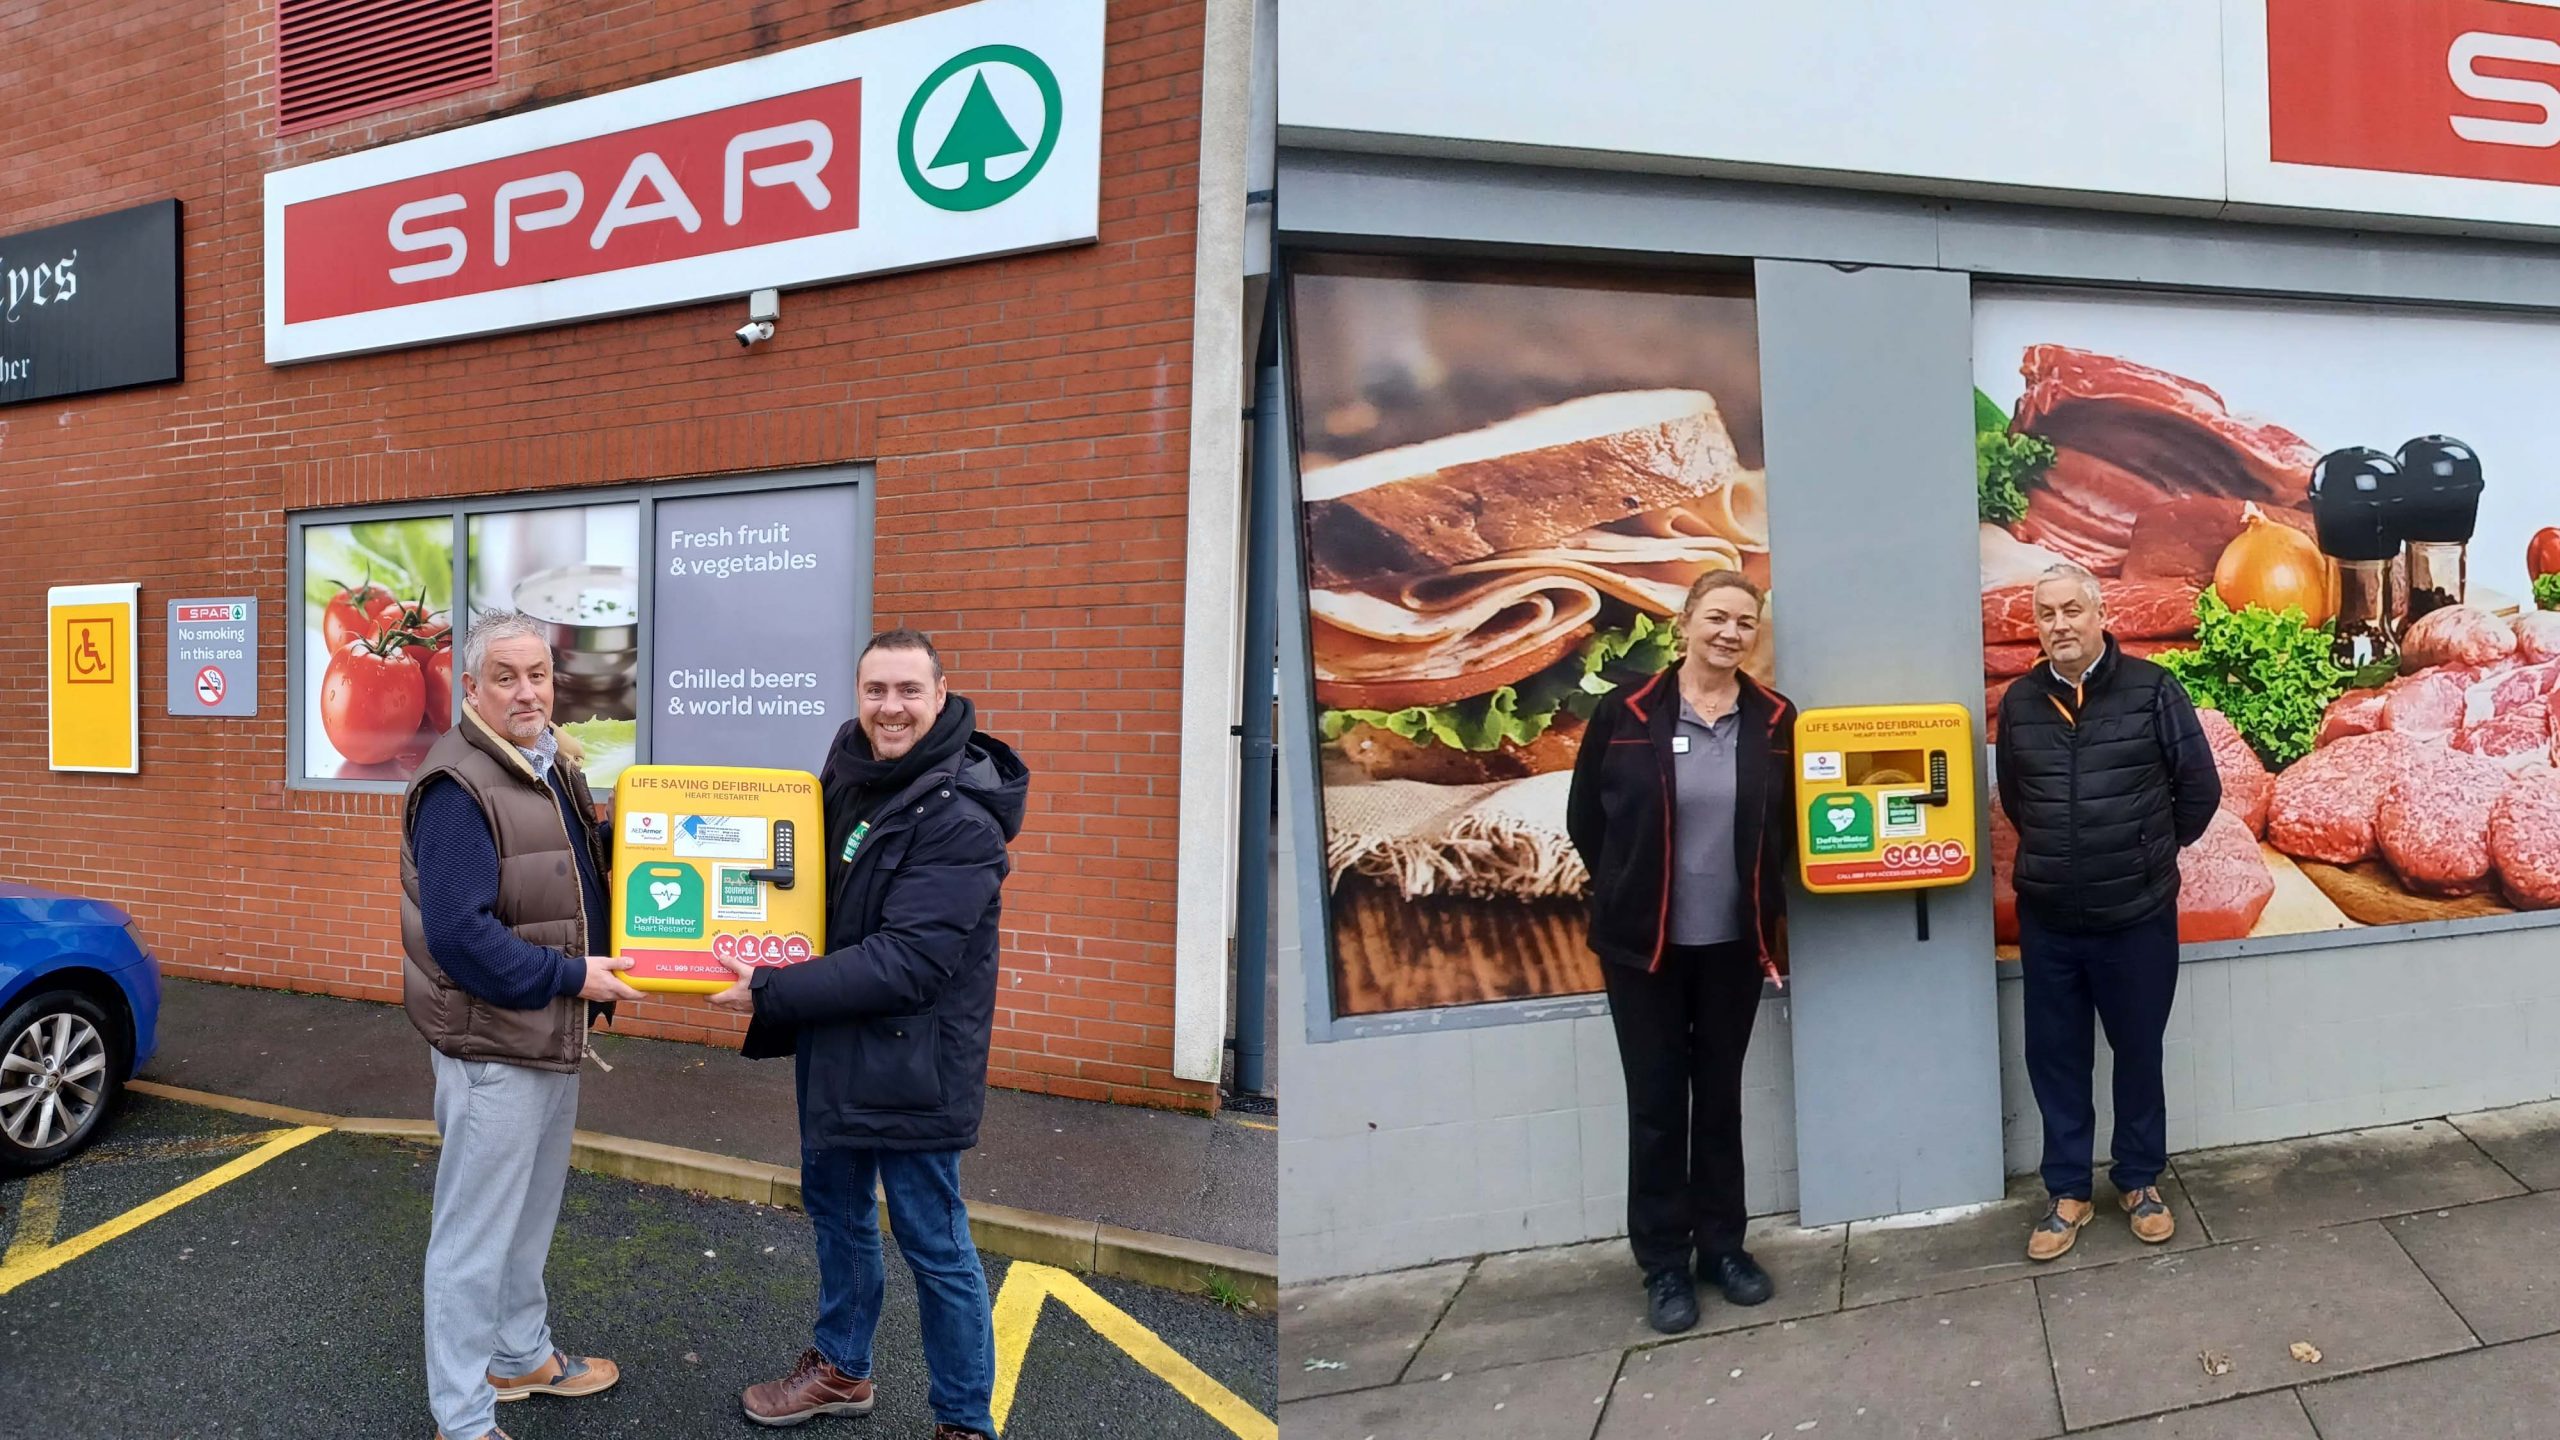 Mark Layton, Area Manager at James Hall & Co. Ltd, with members of the Southport Saviours improving defibrillator access at SPAR Roe Lane and SPAR Cambridge Road in Southport.